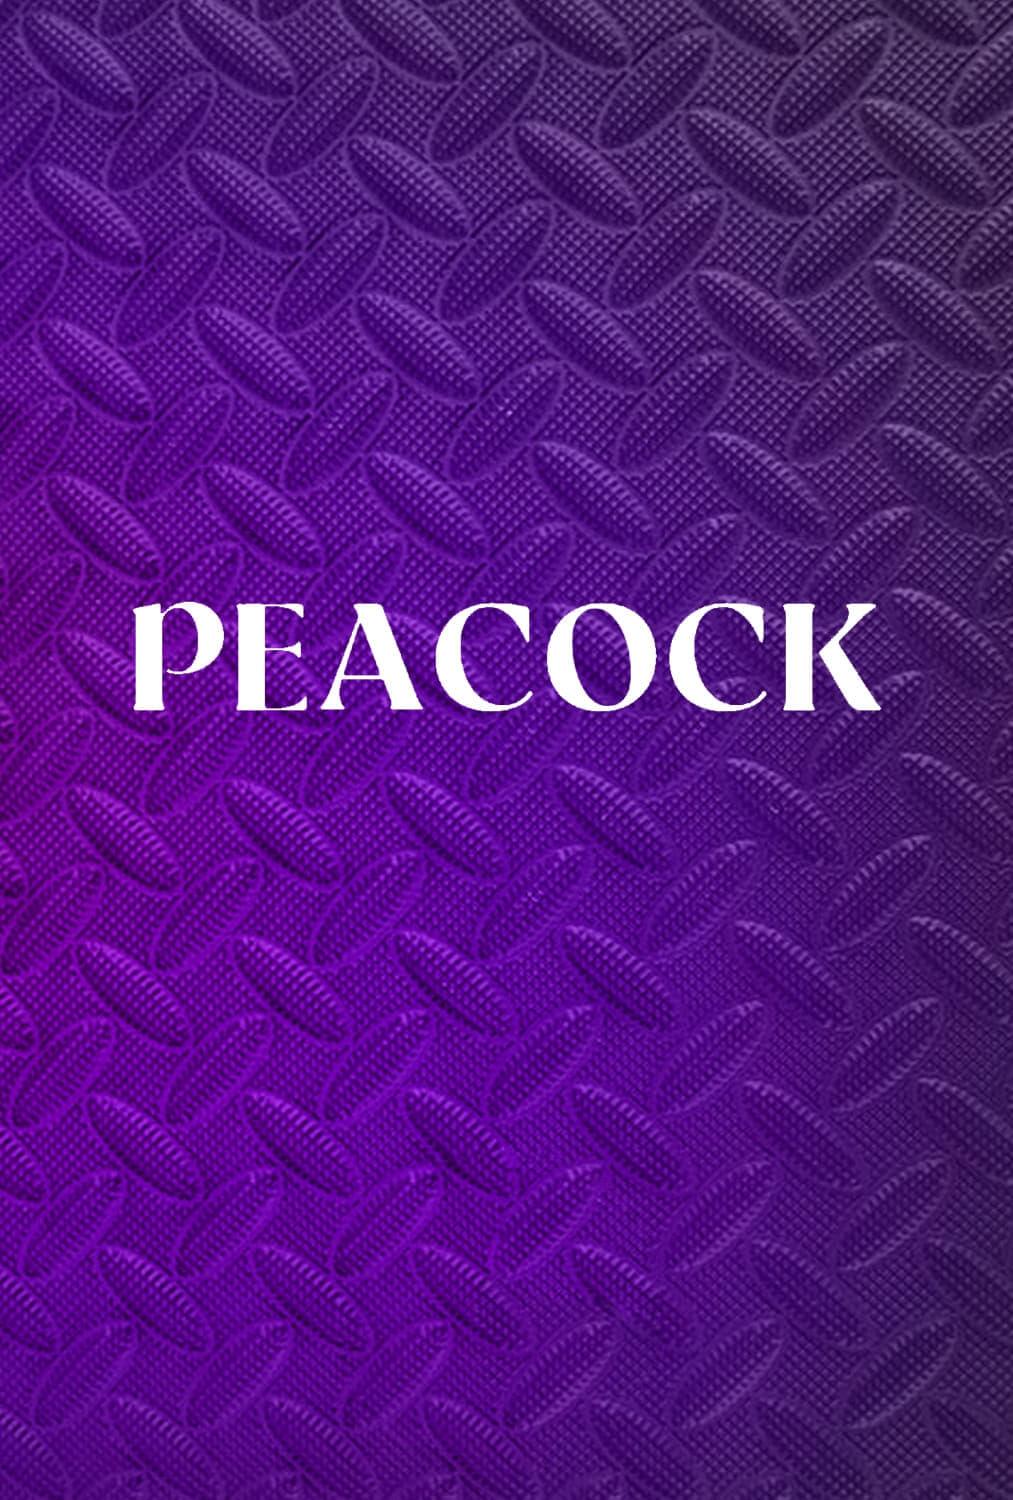 Peacock poster